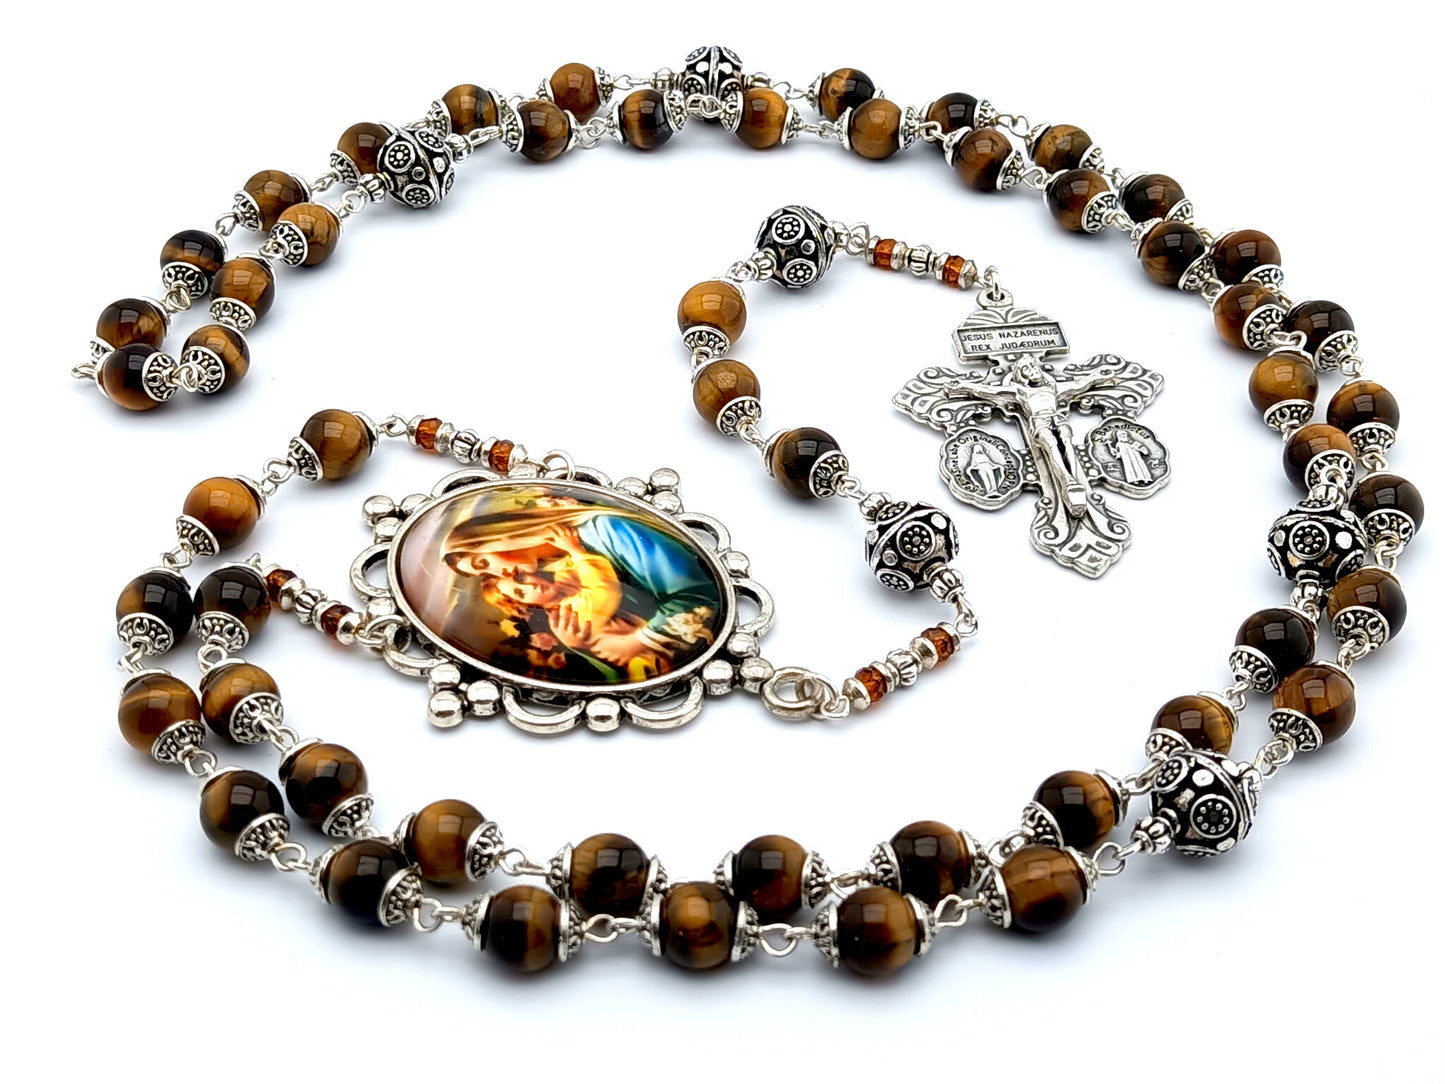 Virgin Mary and Child unique rosary beads with tigers eye gemstone and silver beads, silver pardon double pardon crucifix and picture centre medal.